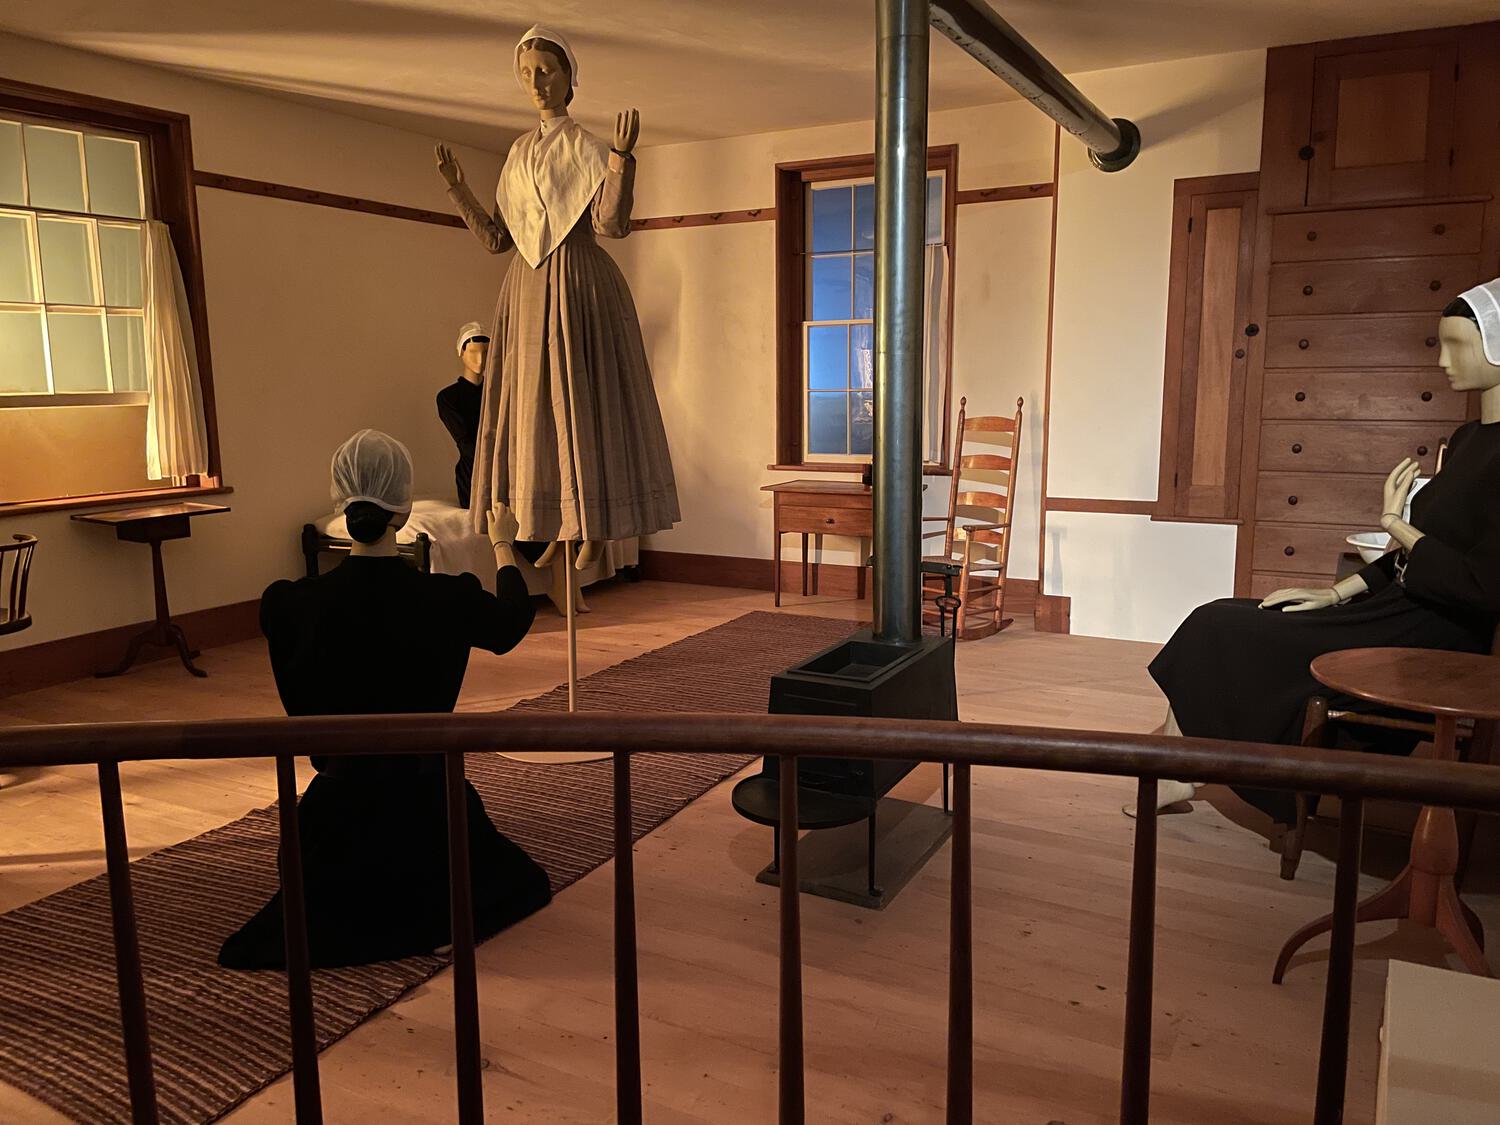 Mannequins dressed like Quakers are scattered around a period room. One is floating a few feet above the ground while another kneels before her.